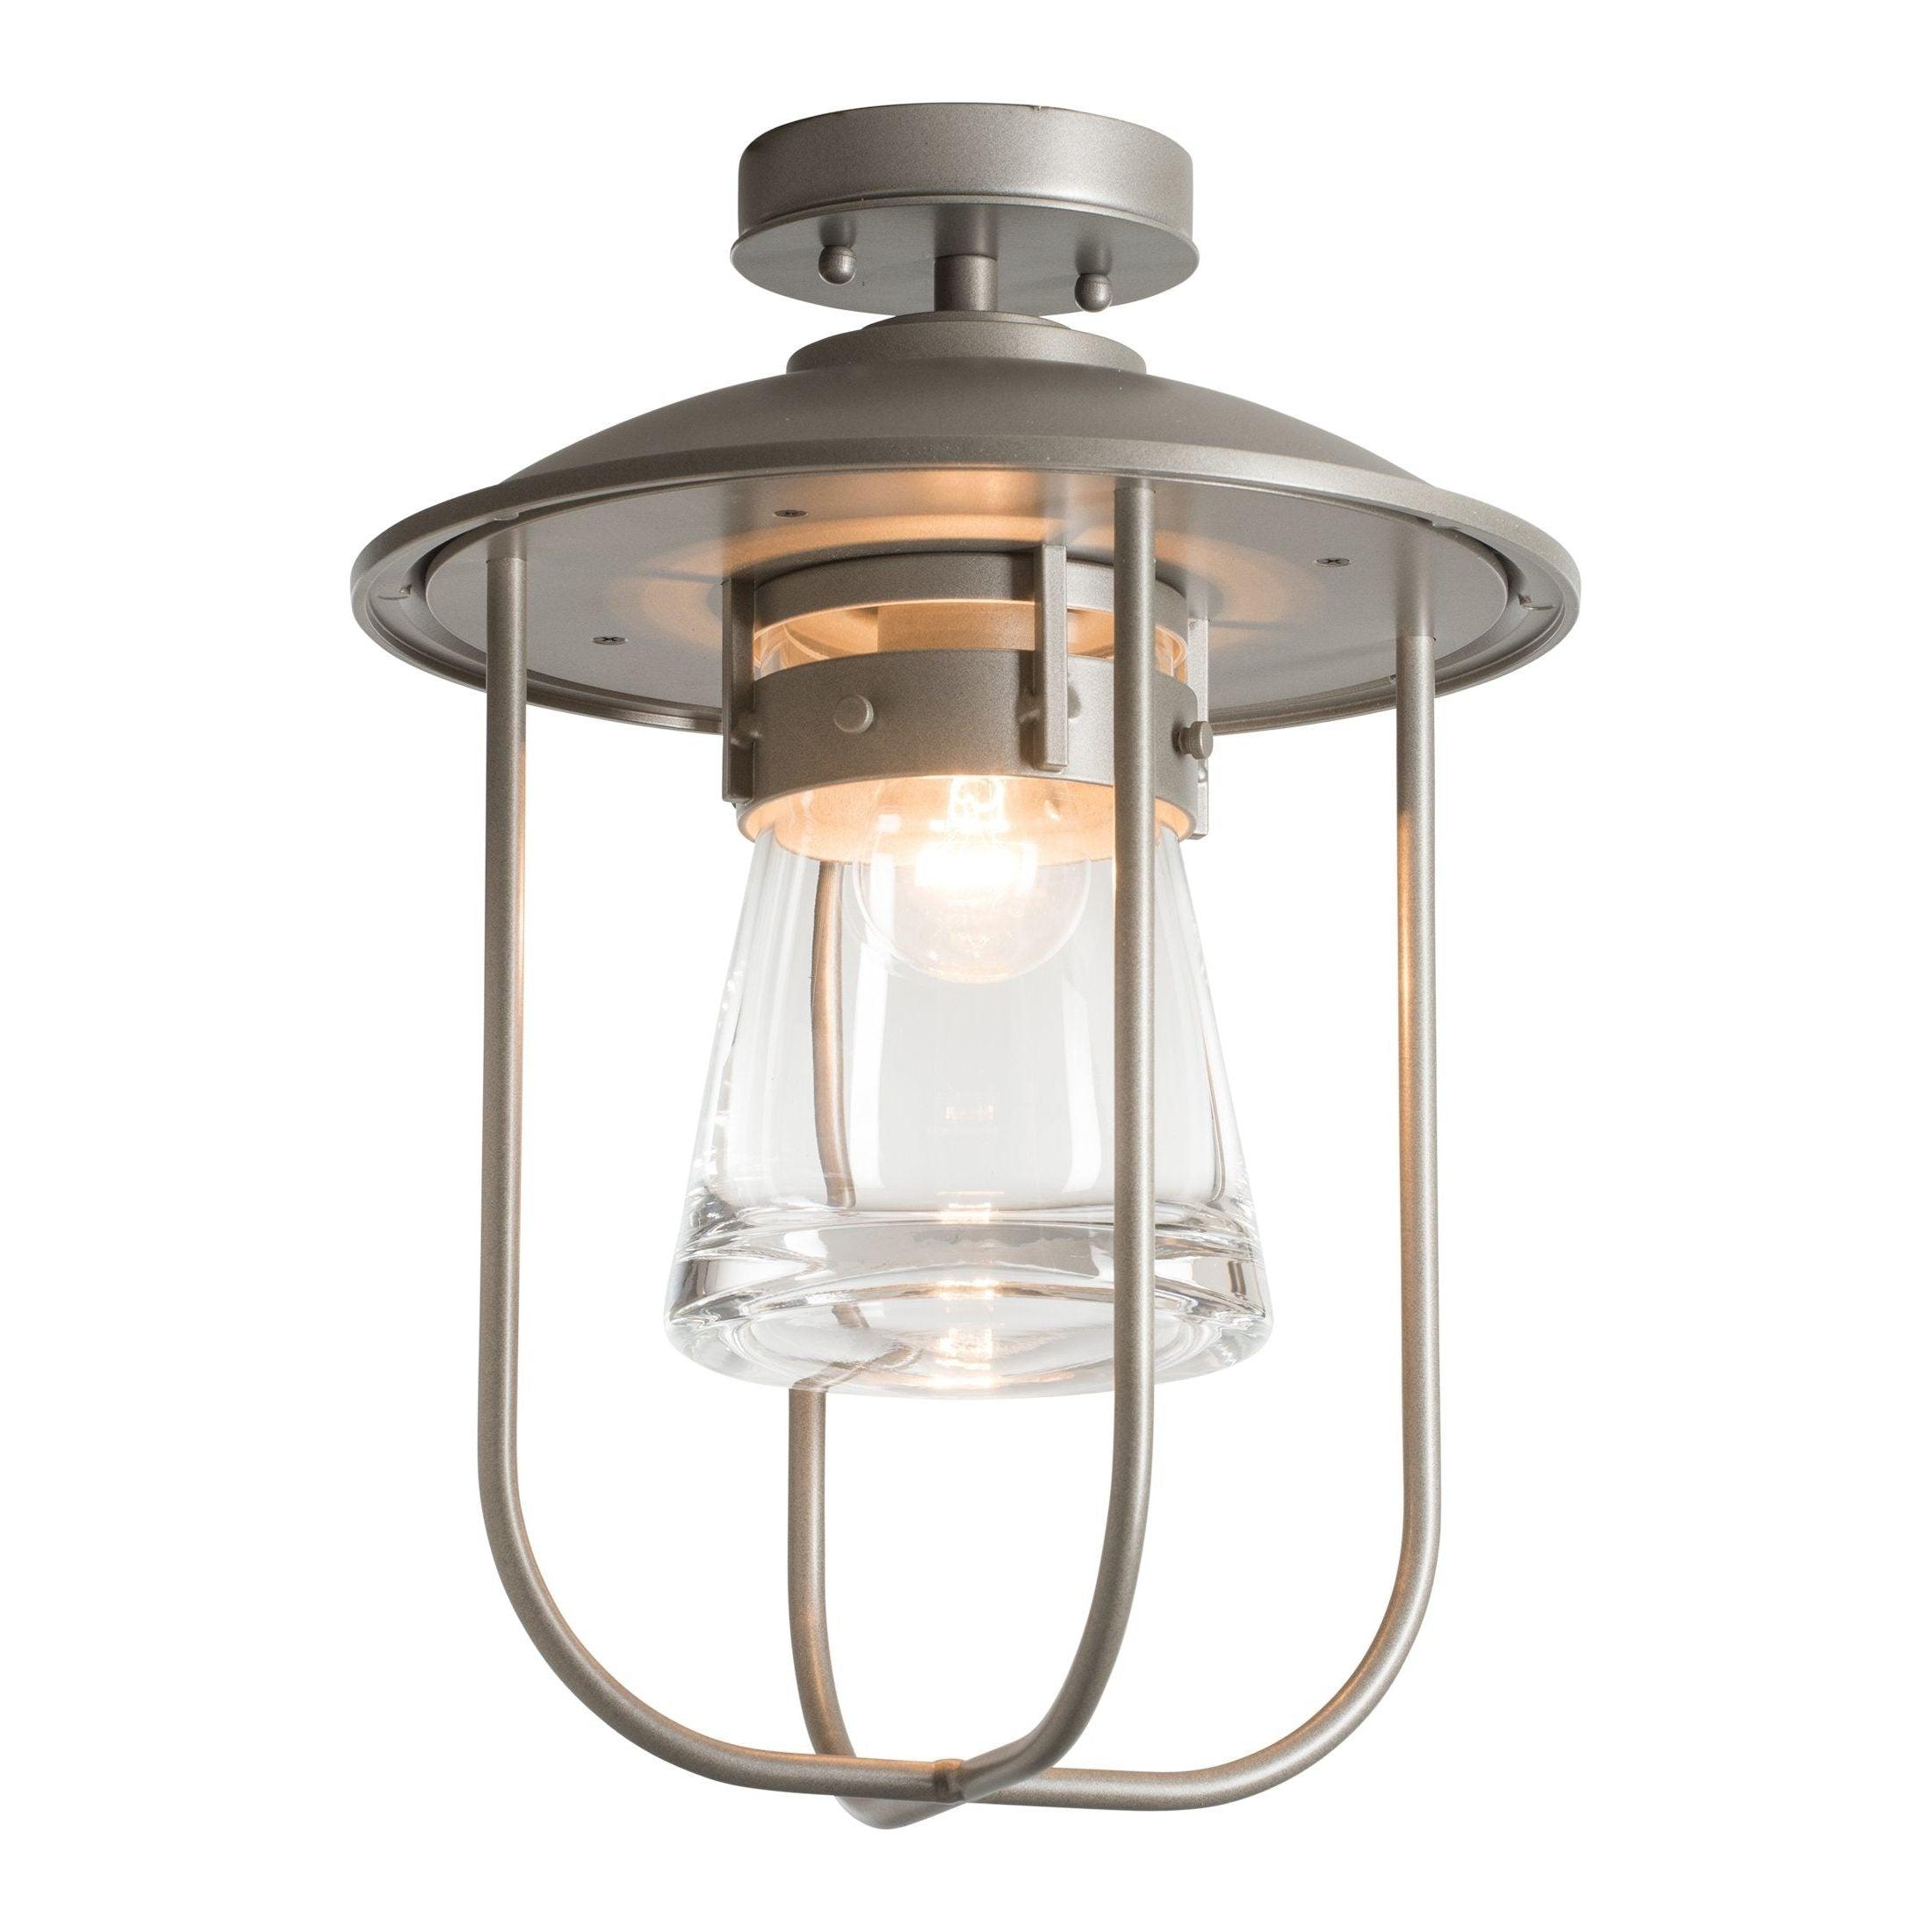 Hubbardton Forge - Erlenmeyer Outdoor-Ceiling-Light - Lights Canada